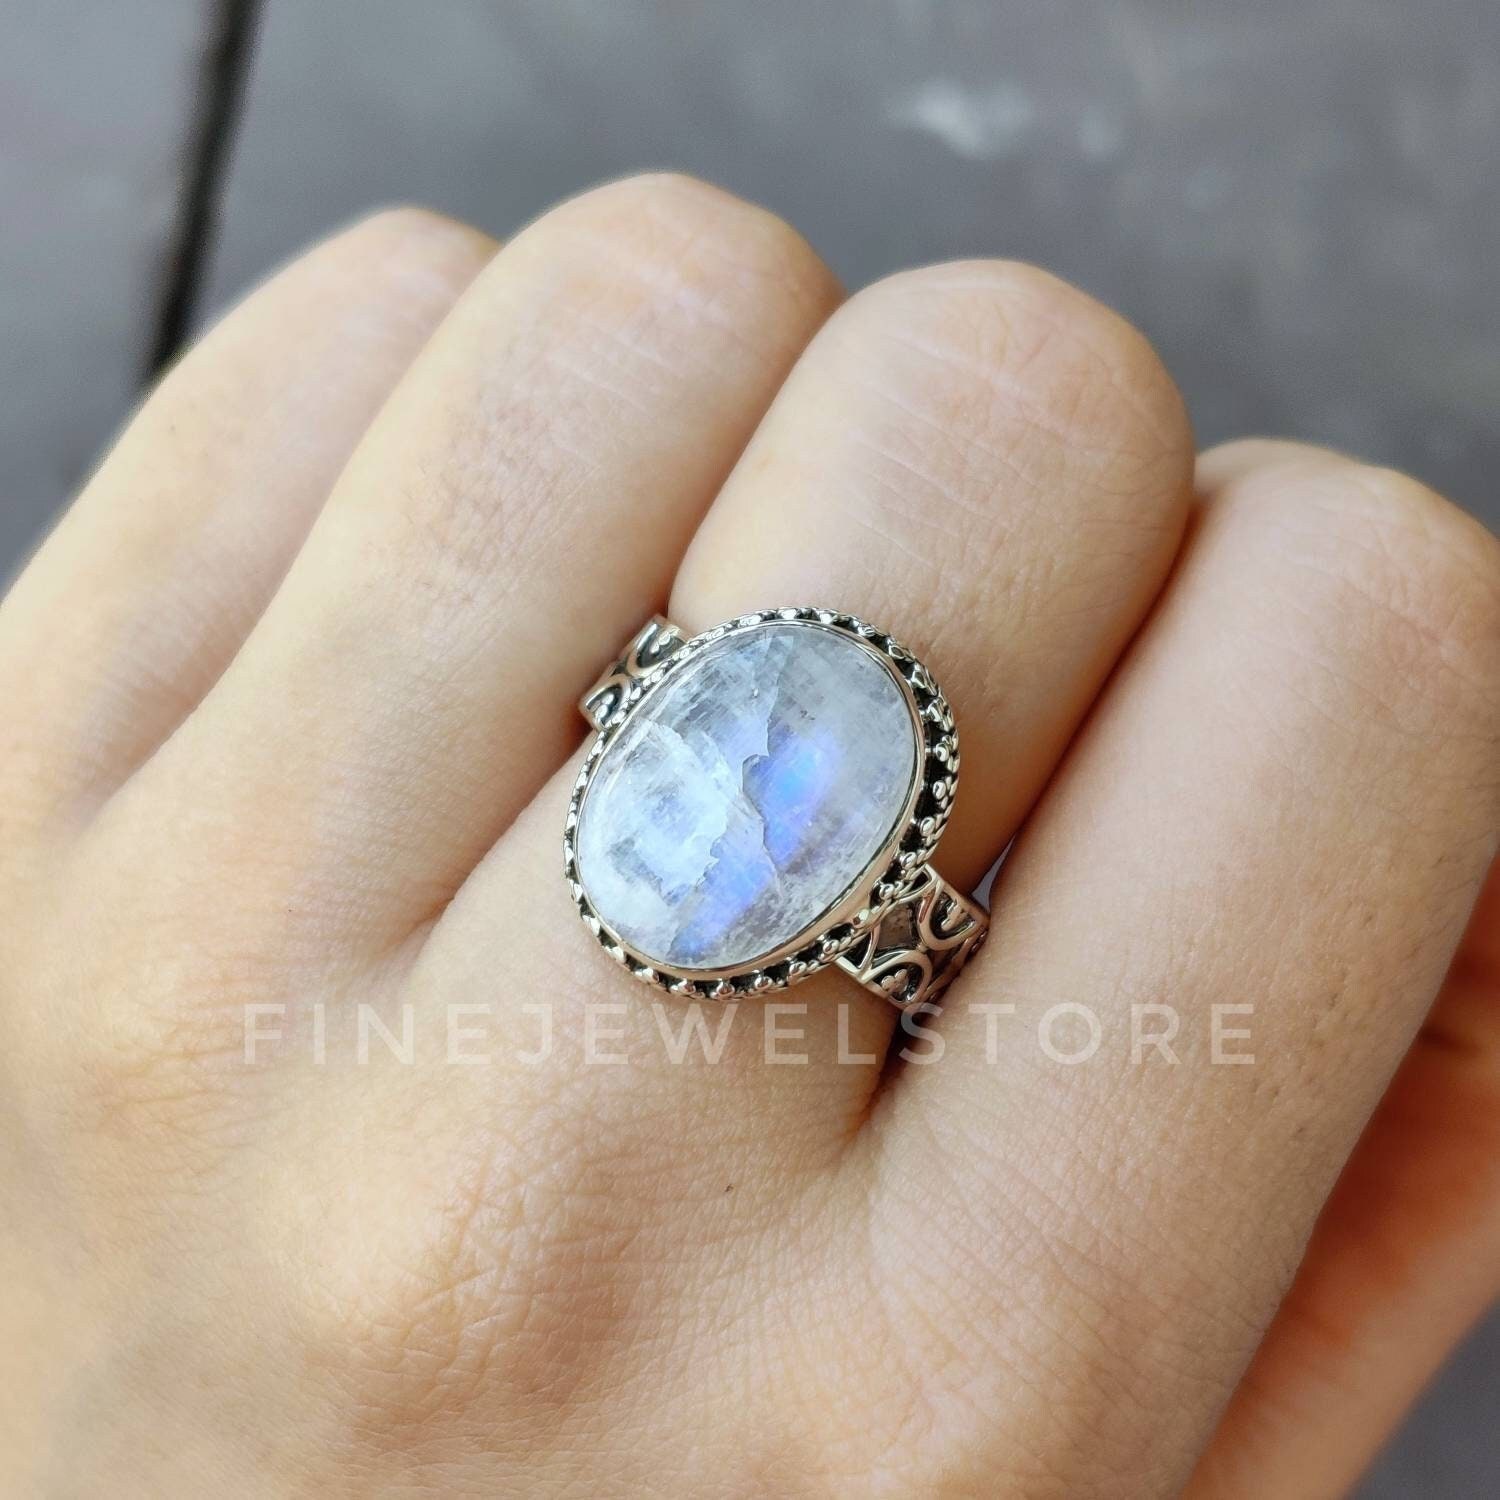 Rainbow Moonstone 925 Silver Plated Handmade Jewelry Ring US Size 6.5  R-18461